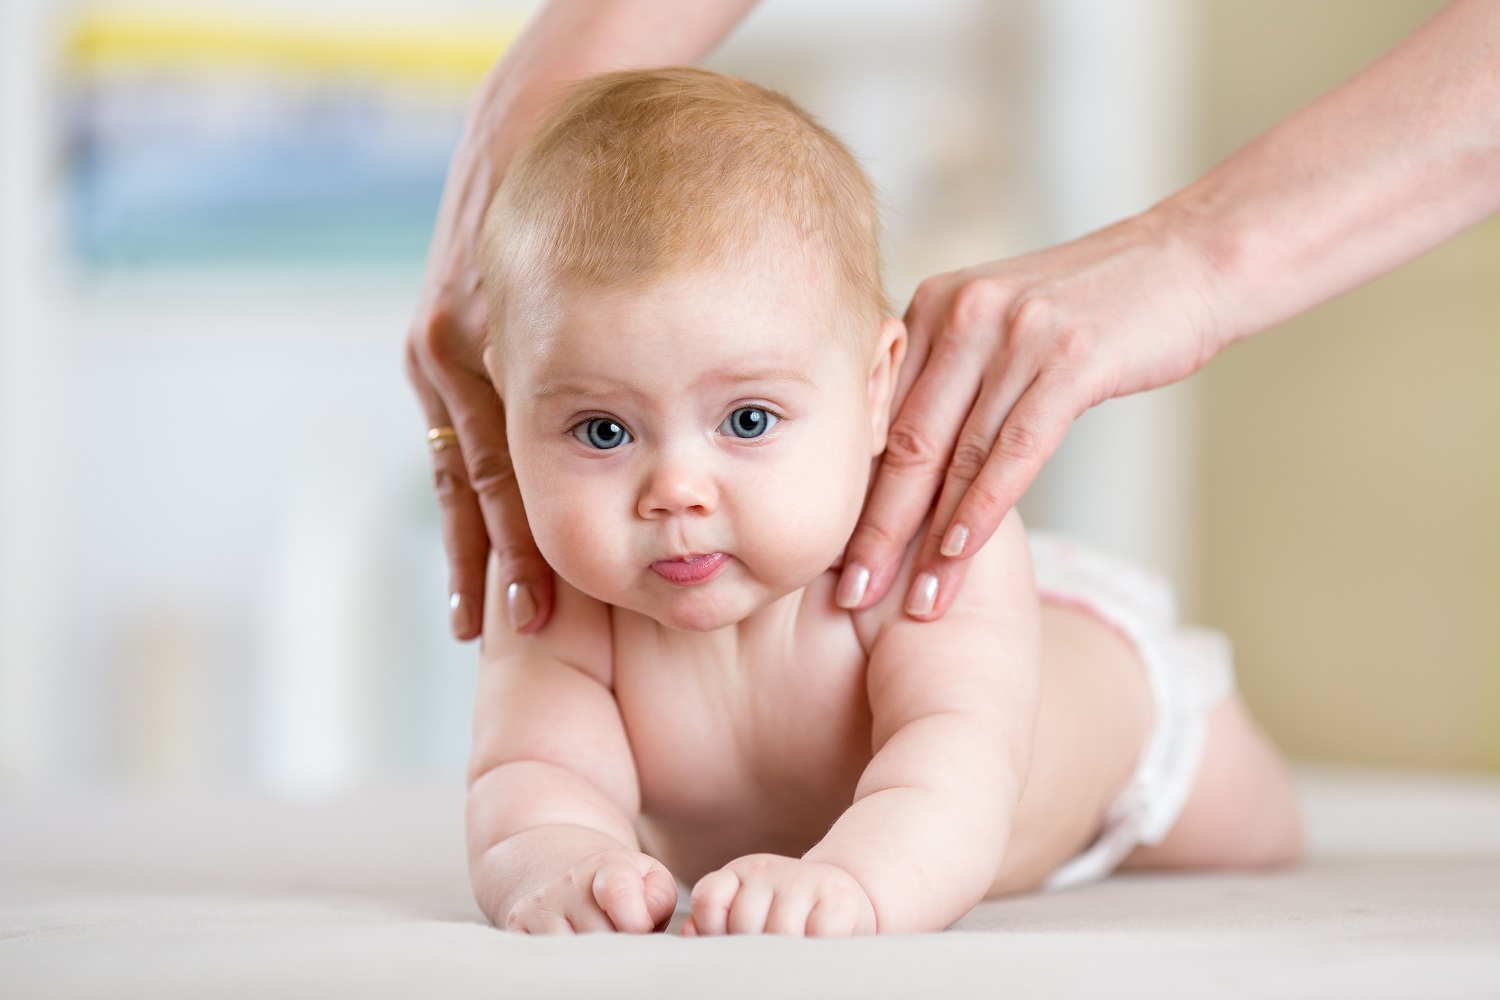 How much is a baby massage?